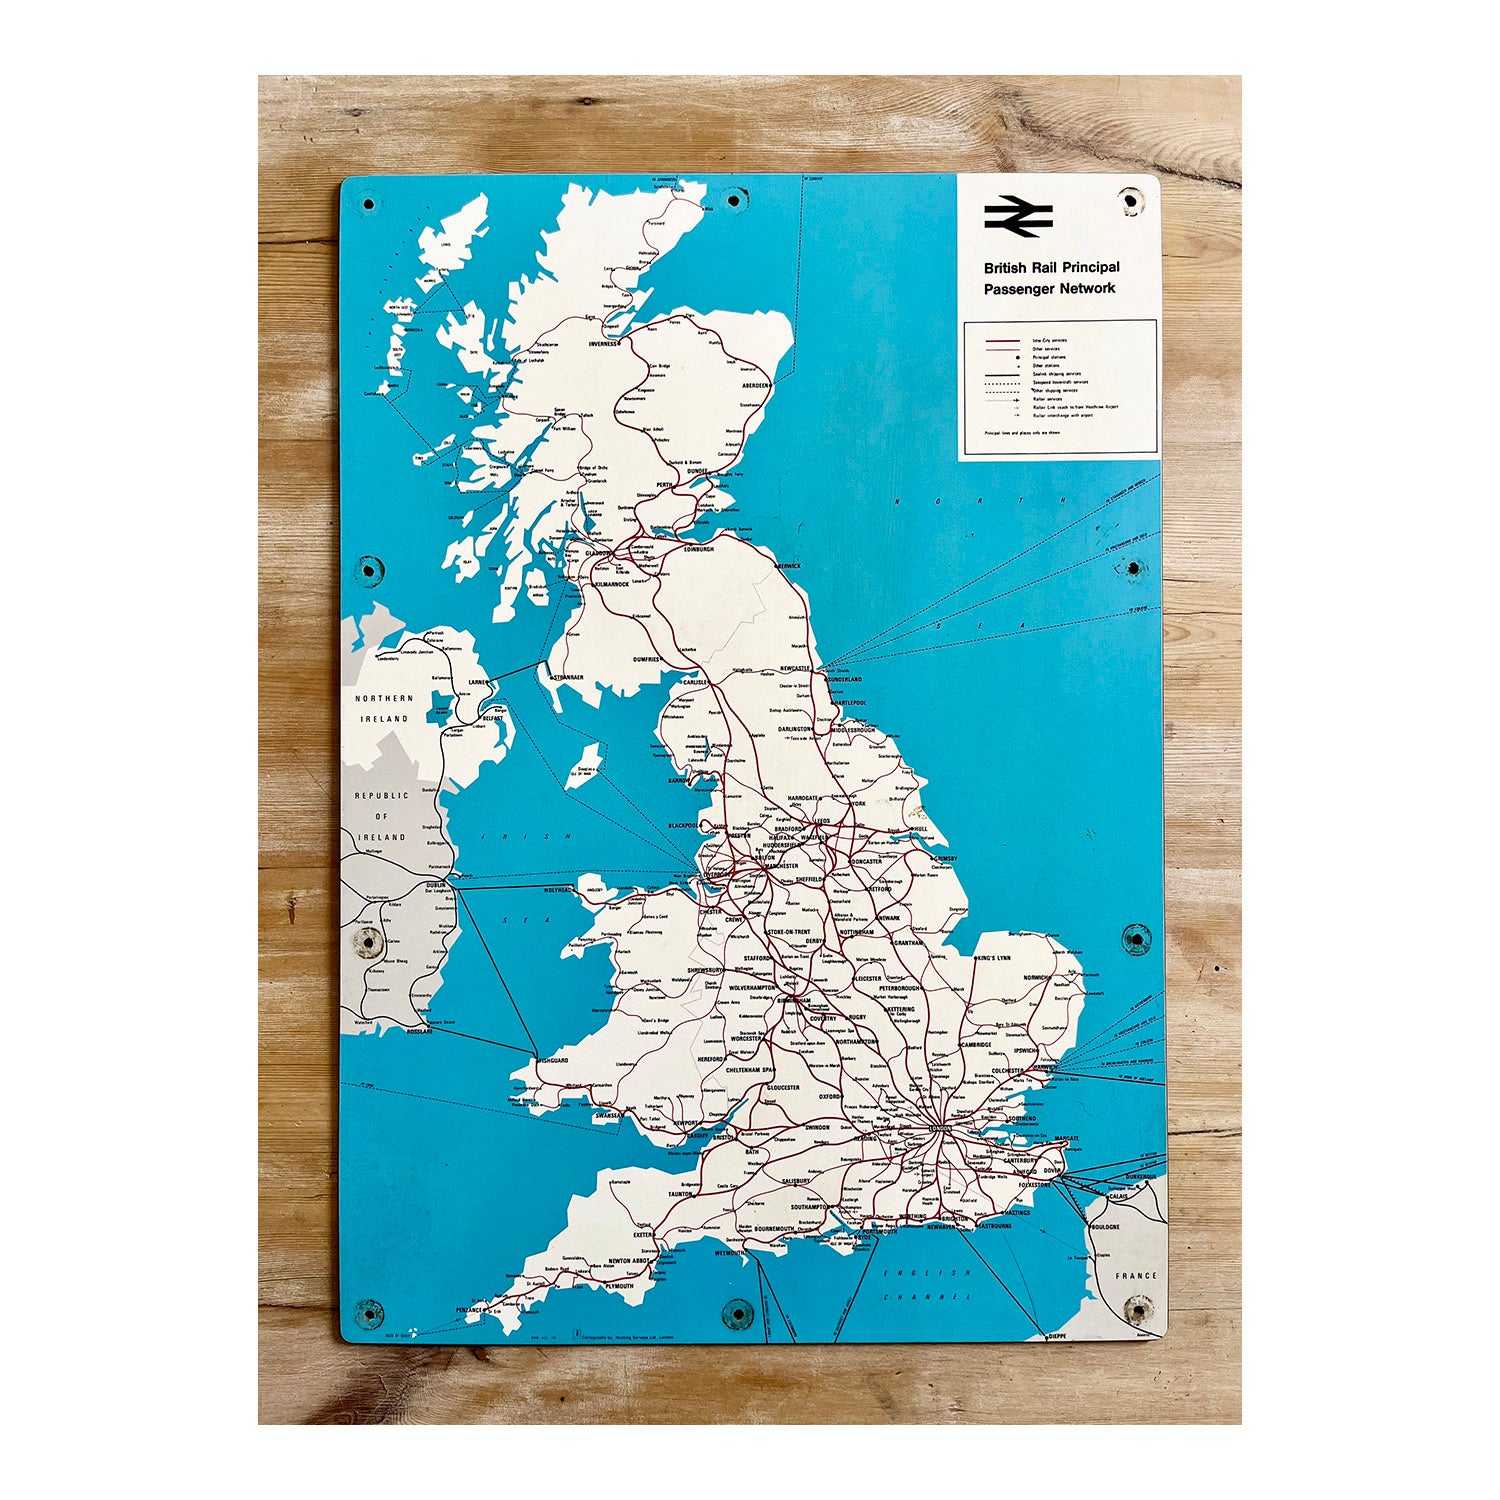 British Rail Principal Passenger Network map on melamine board, 1978. This type of rigid poster map was typically displayed in the vestibules of railway carriages